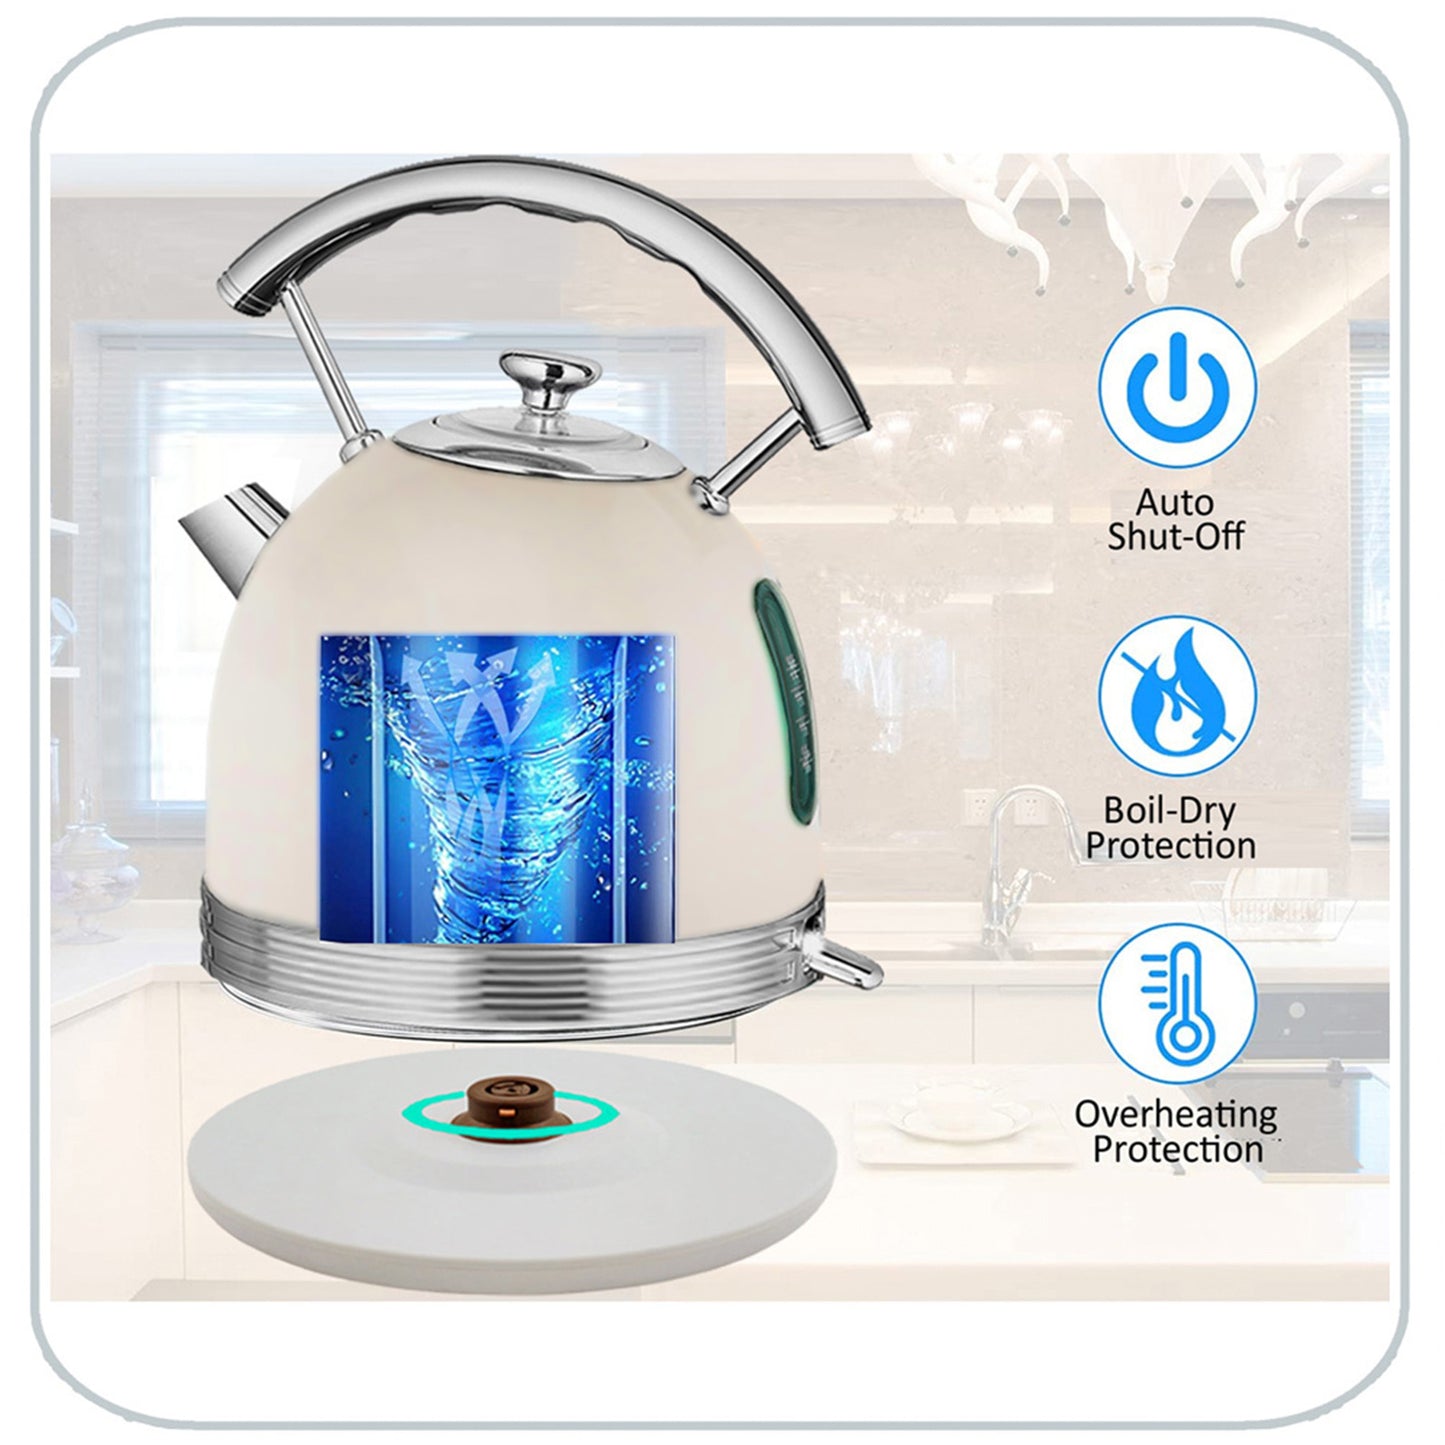 PHILEX 1.7 Off-White Electric Kettle Boiler Stainless Steel Retro